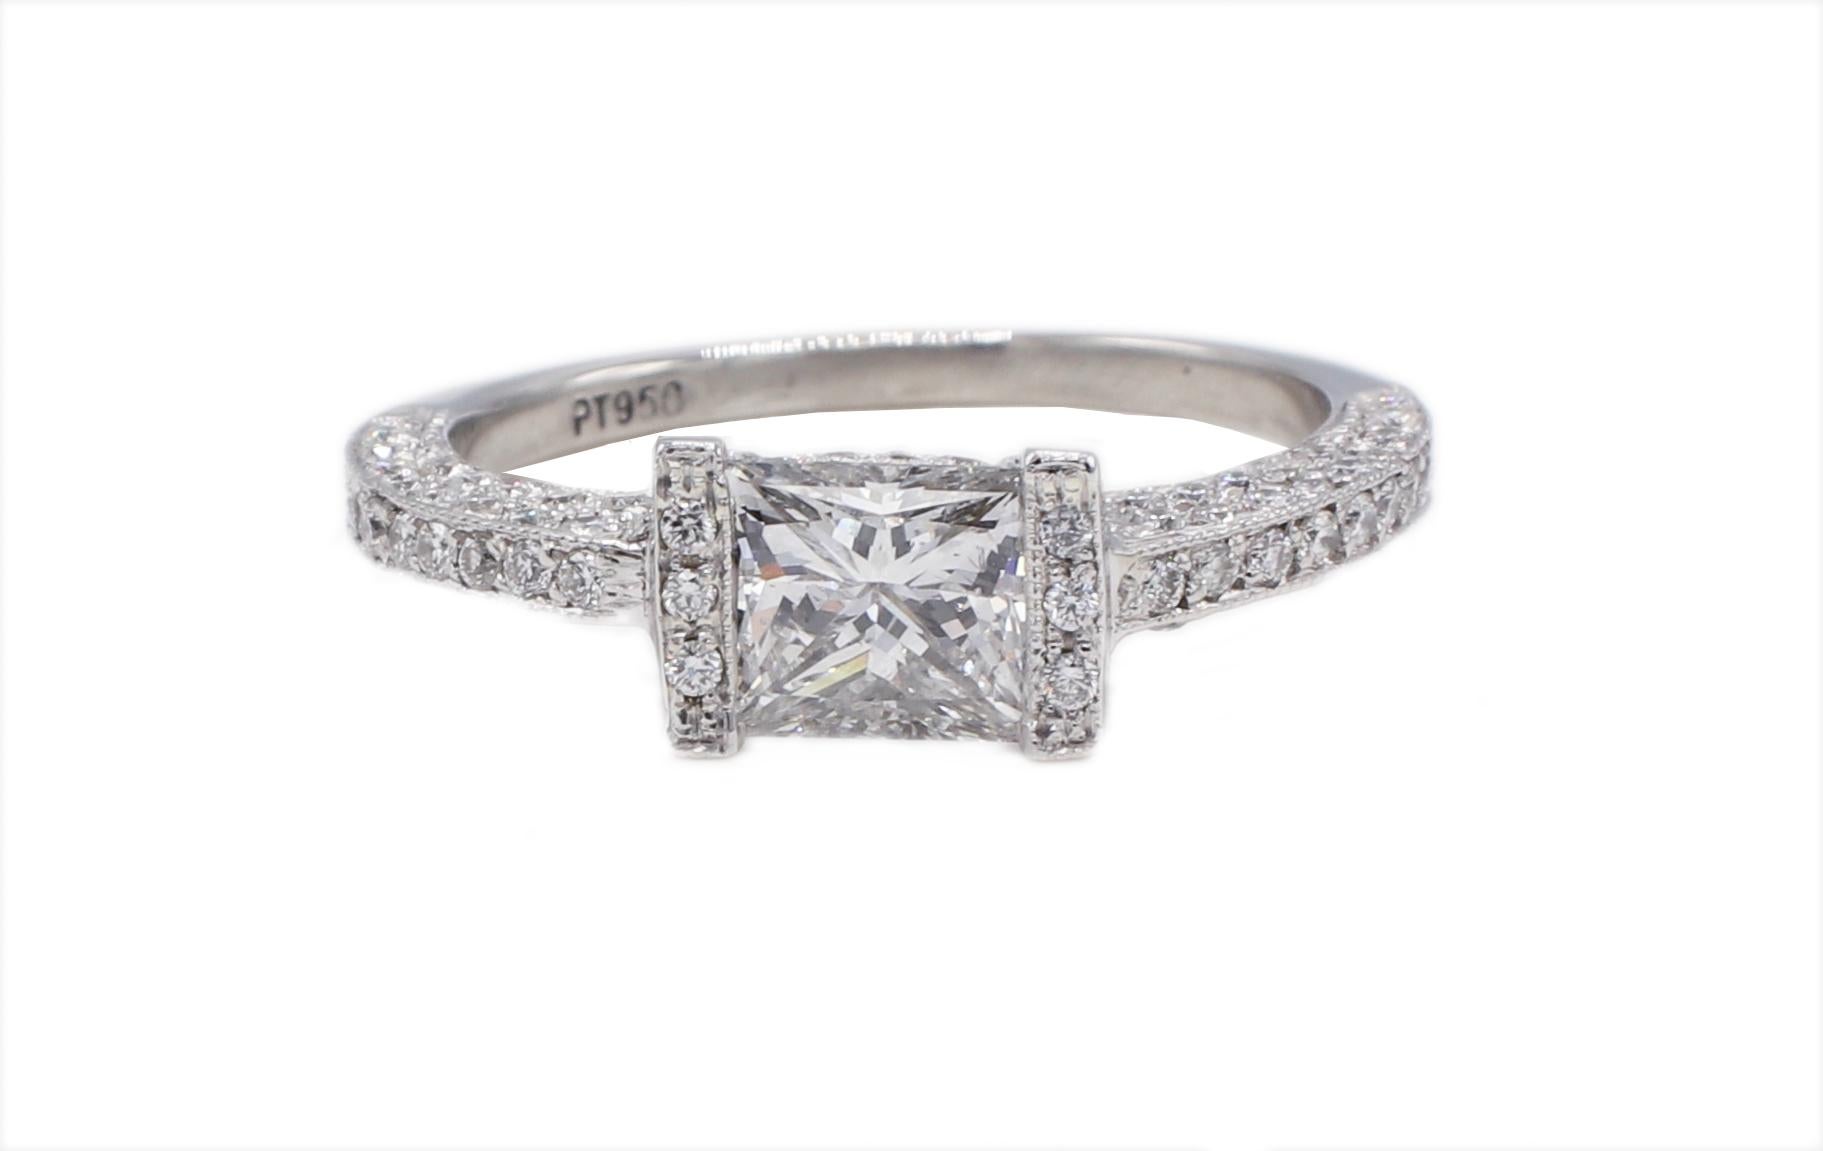 Platinum Princess Cut .90 Carat East West Diamond Engagement Ring Size 5.5 
Metal: Platinum 
Weight: 4.49 grams
Diamond: Approx. .90 carats F-G VS-SI1 center, approx. .40 CTW pave diamonds G VS 
Size: 5.5 (US)
Band is 1.5 - 2mm 

